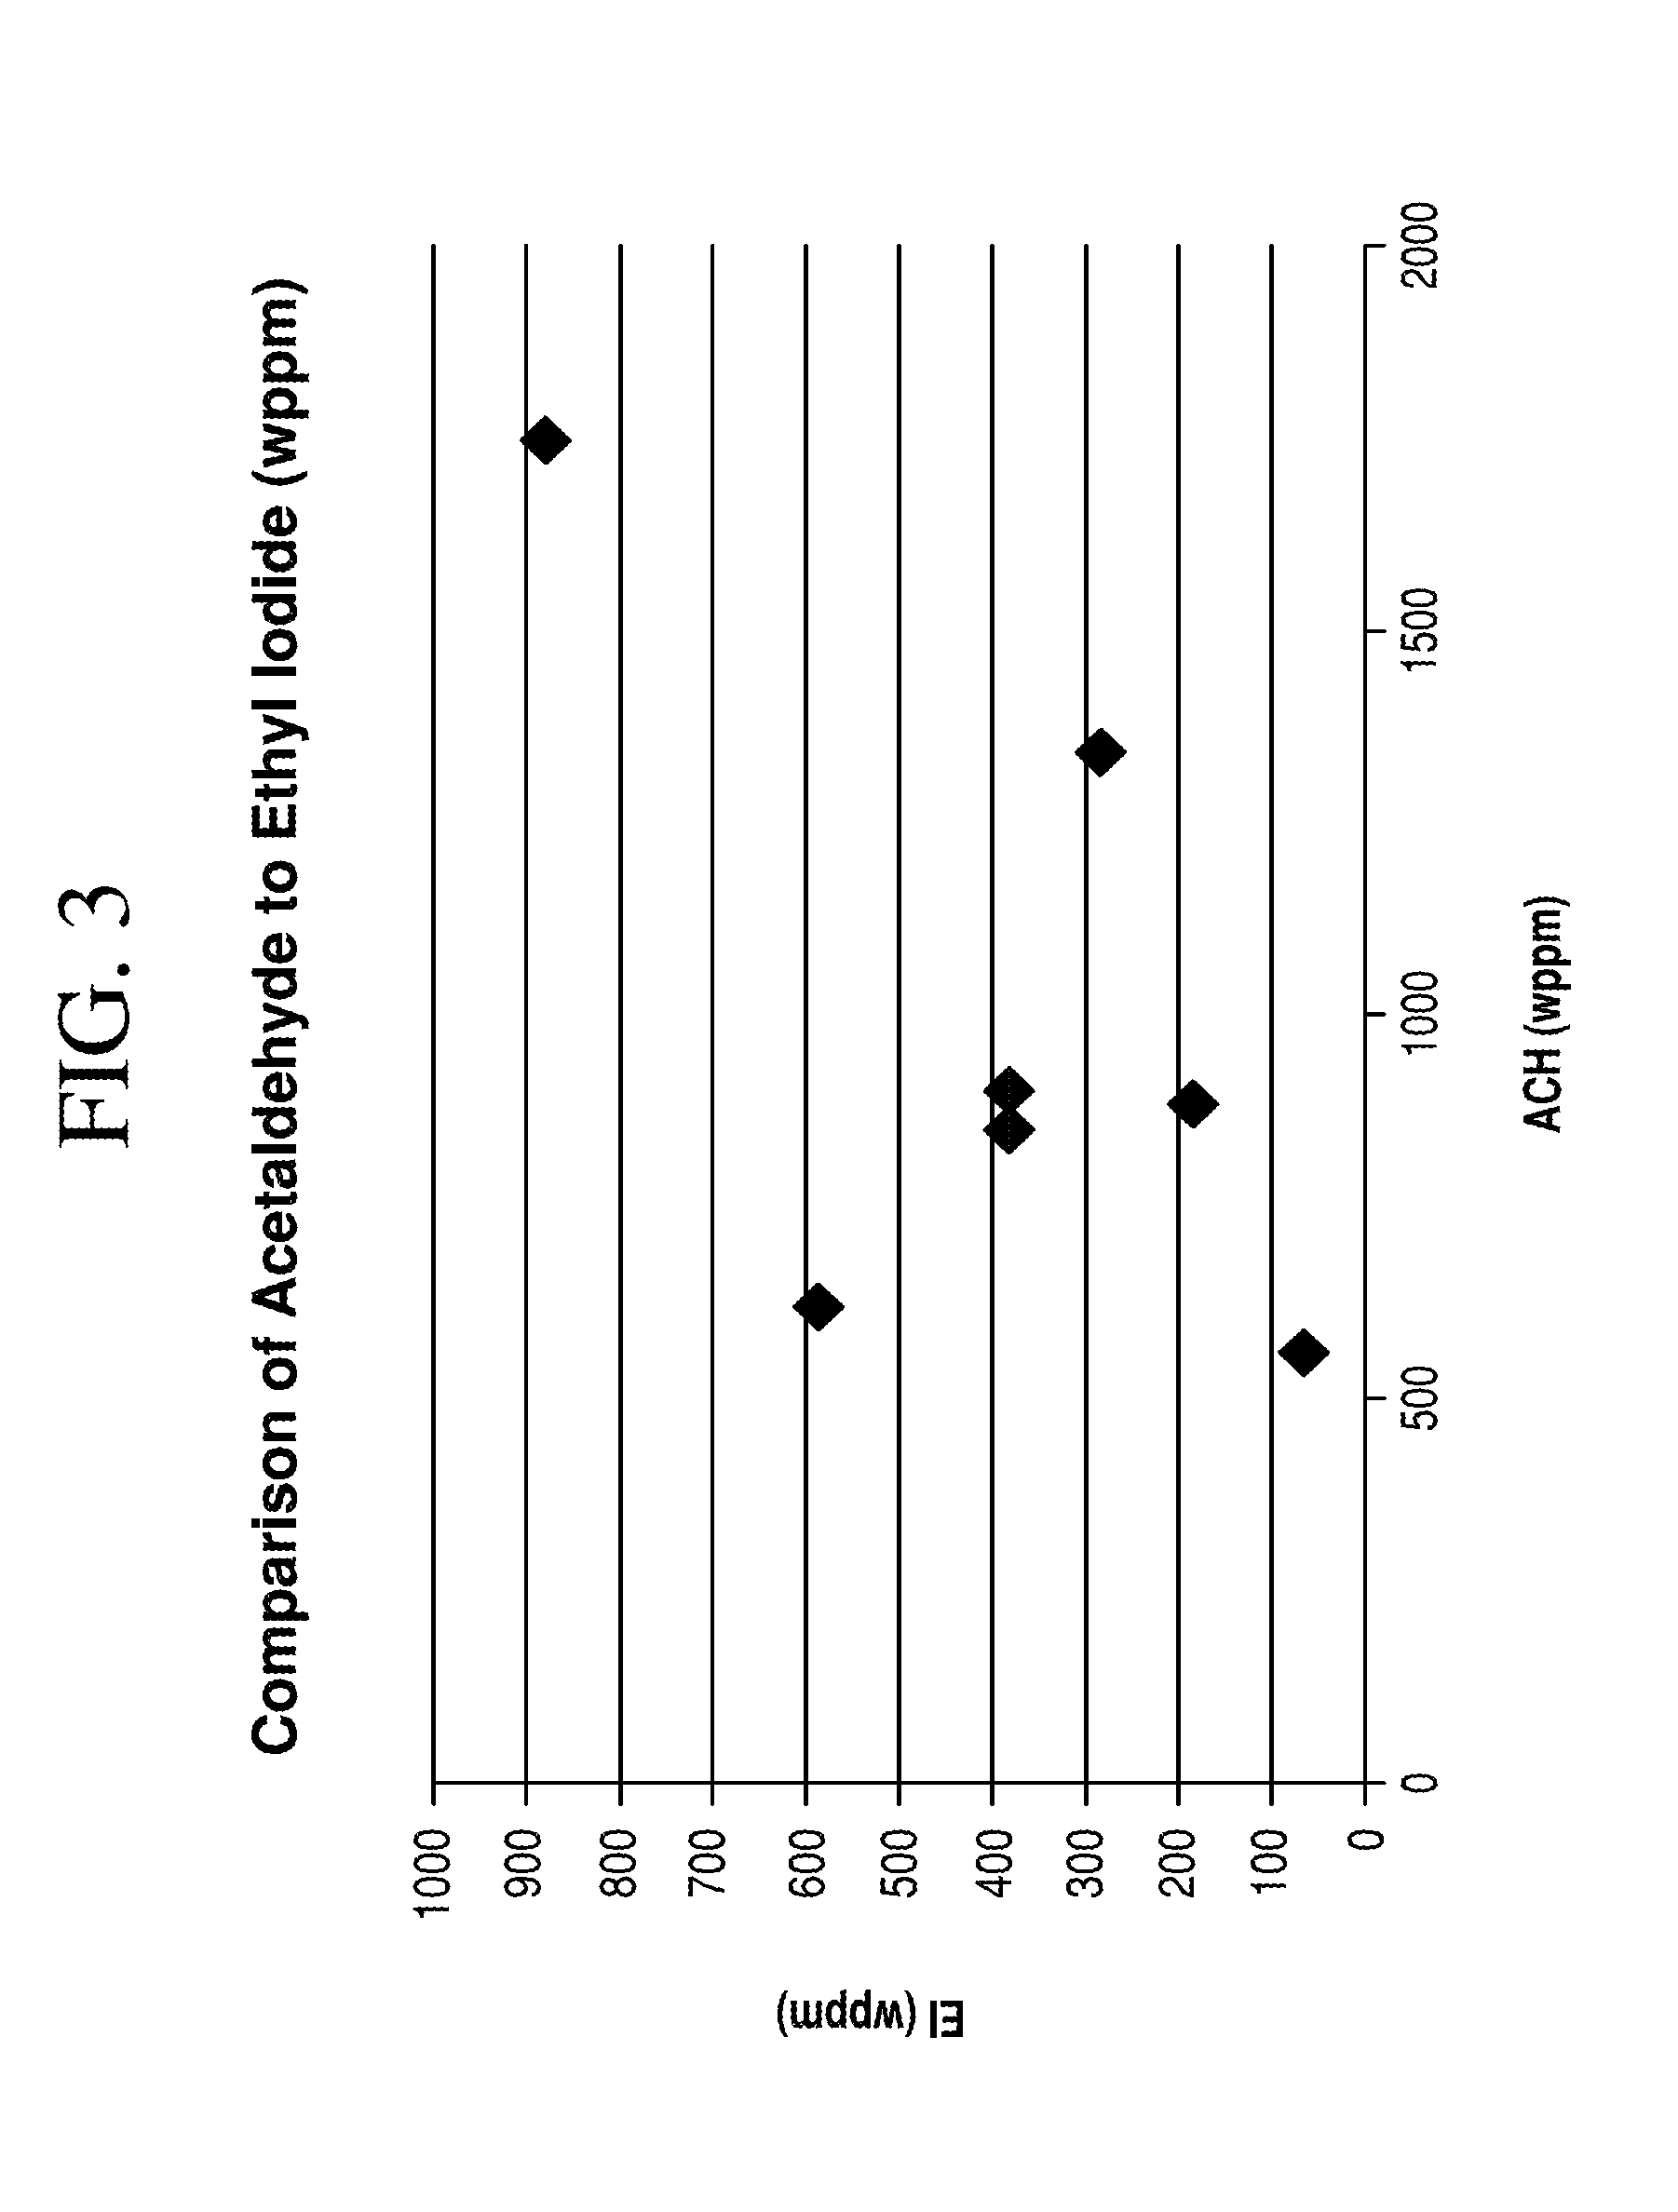 Processes for producing acetic acid from a reaction medium having low ethyl iodide content